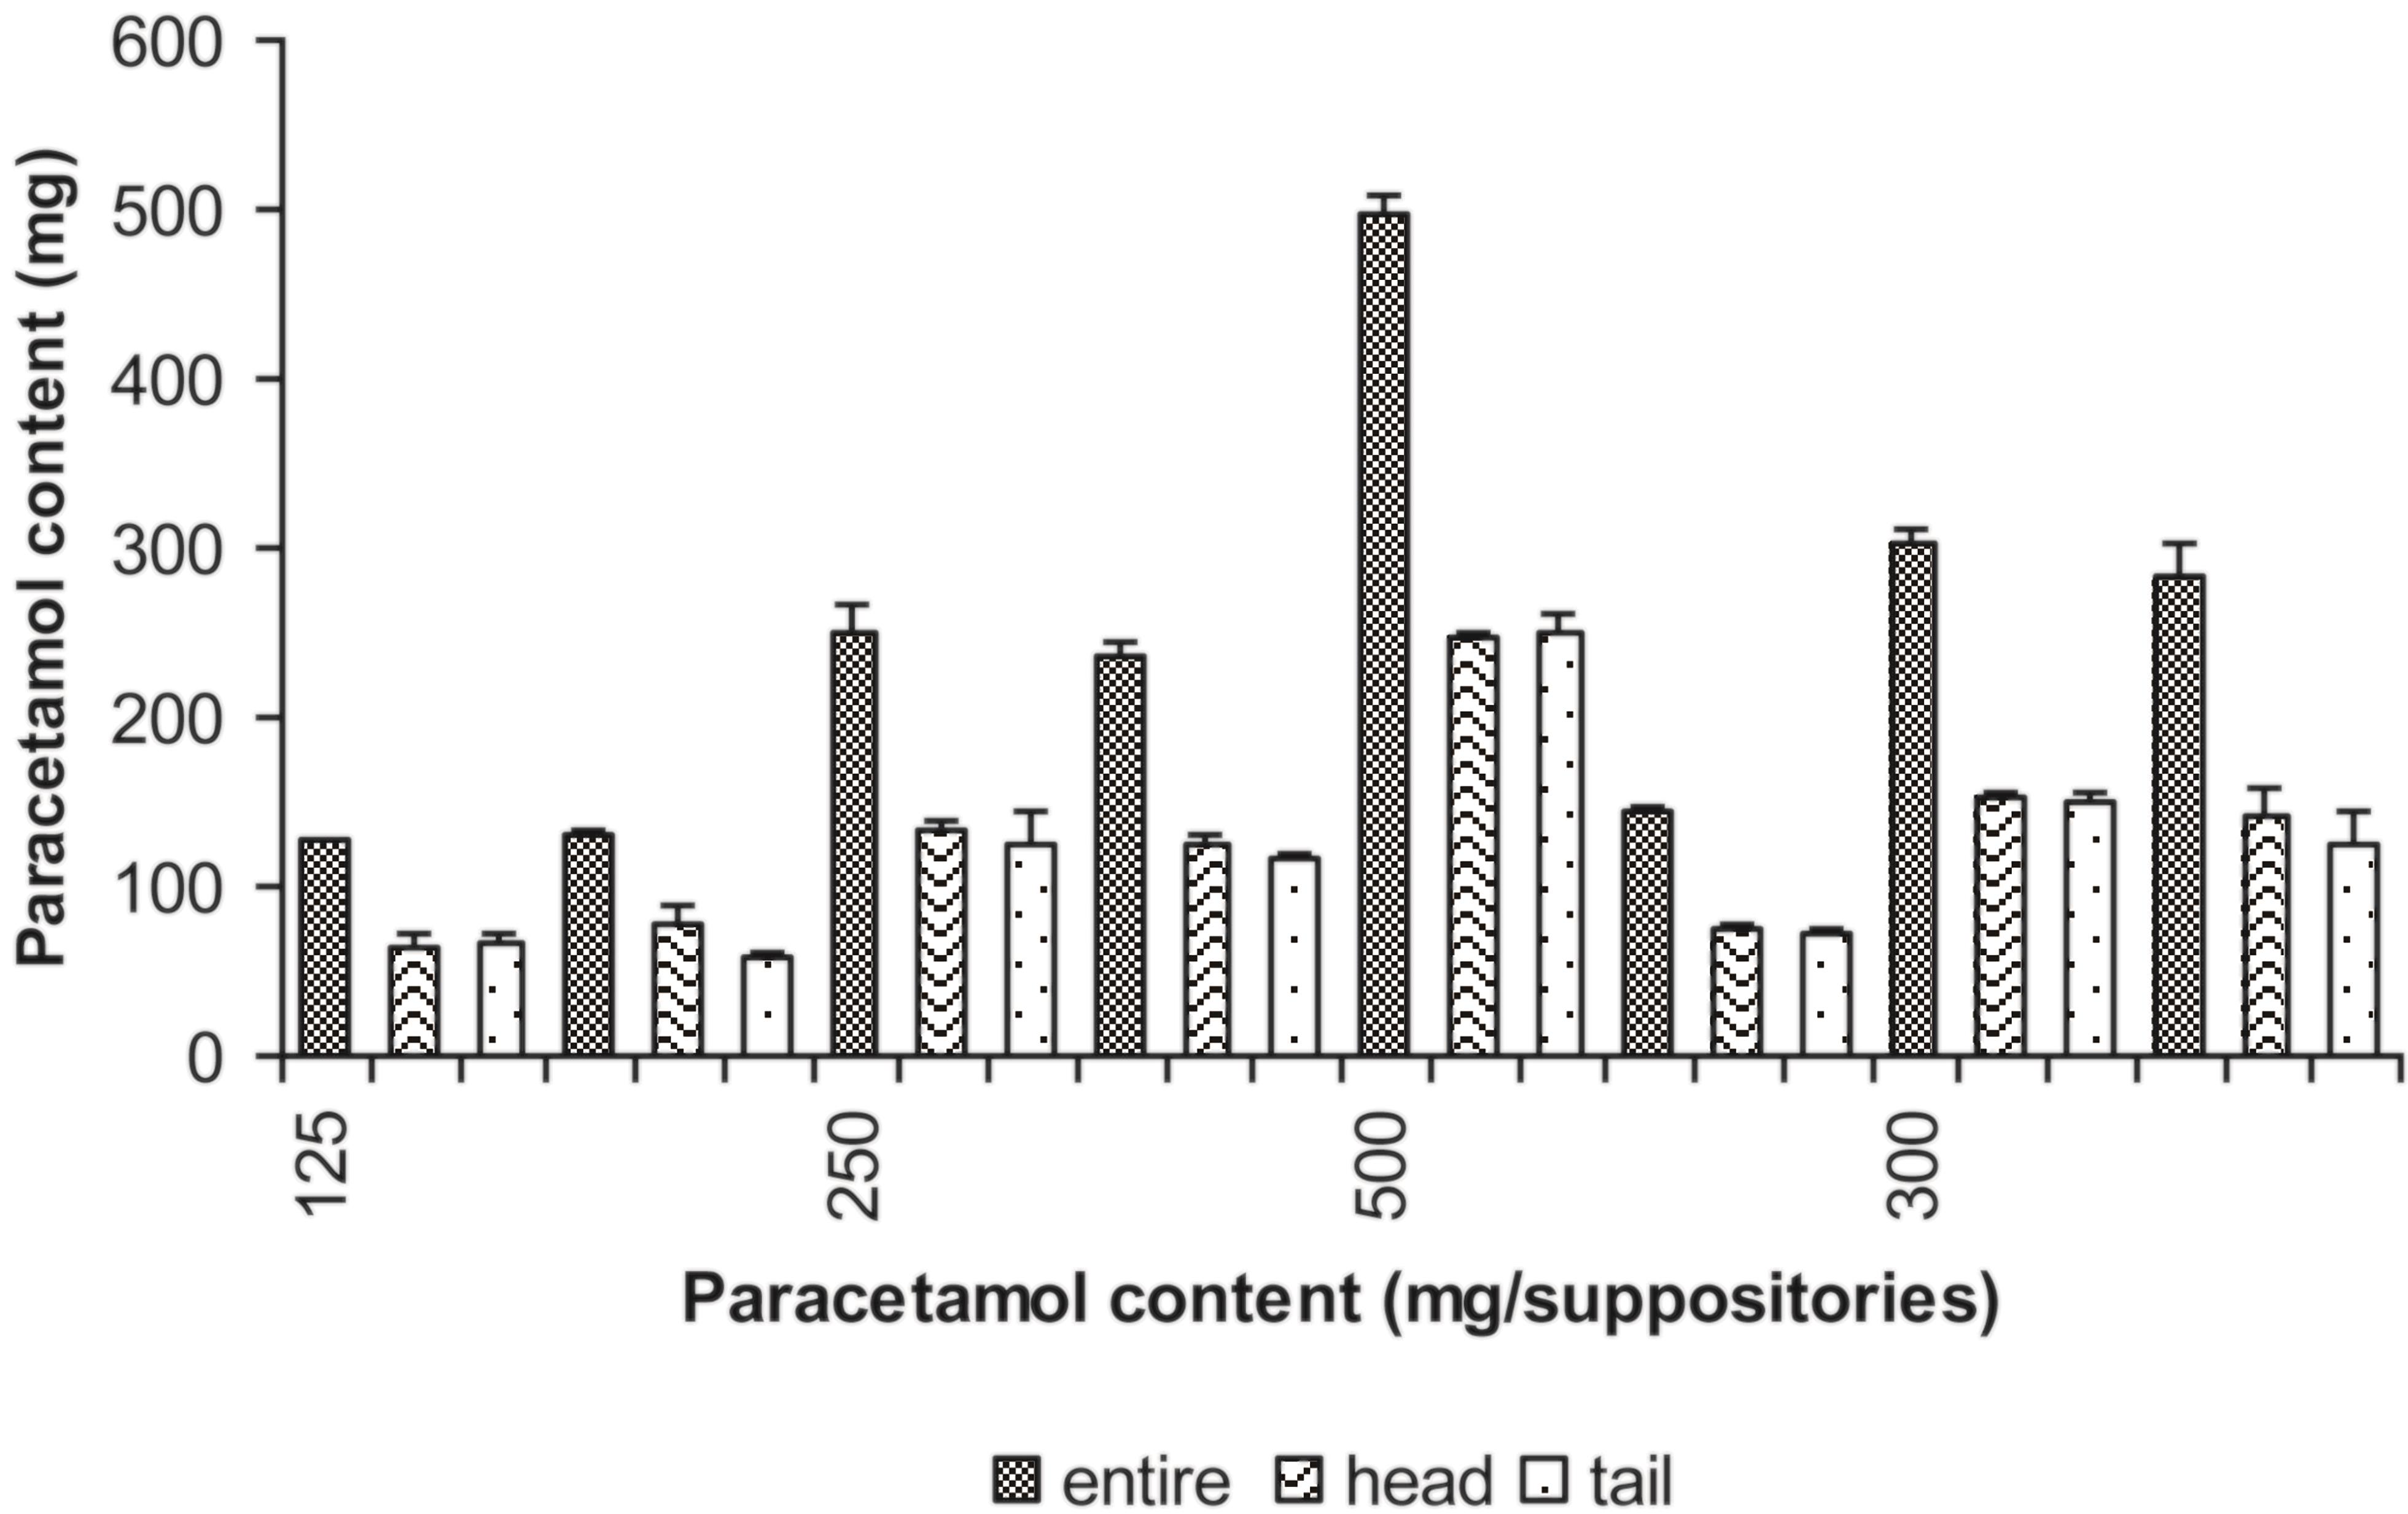 Results for mean acetaminophen content ± standard deviation of suppositories, including entire suppositories and those partitioned into head and tail portions.